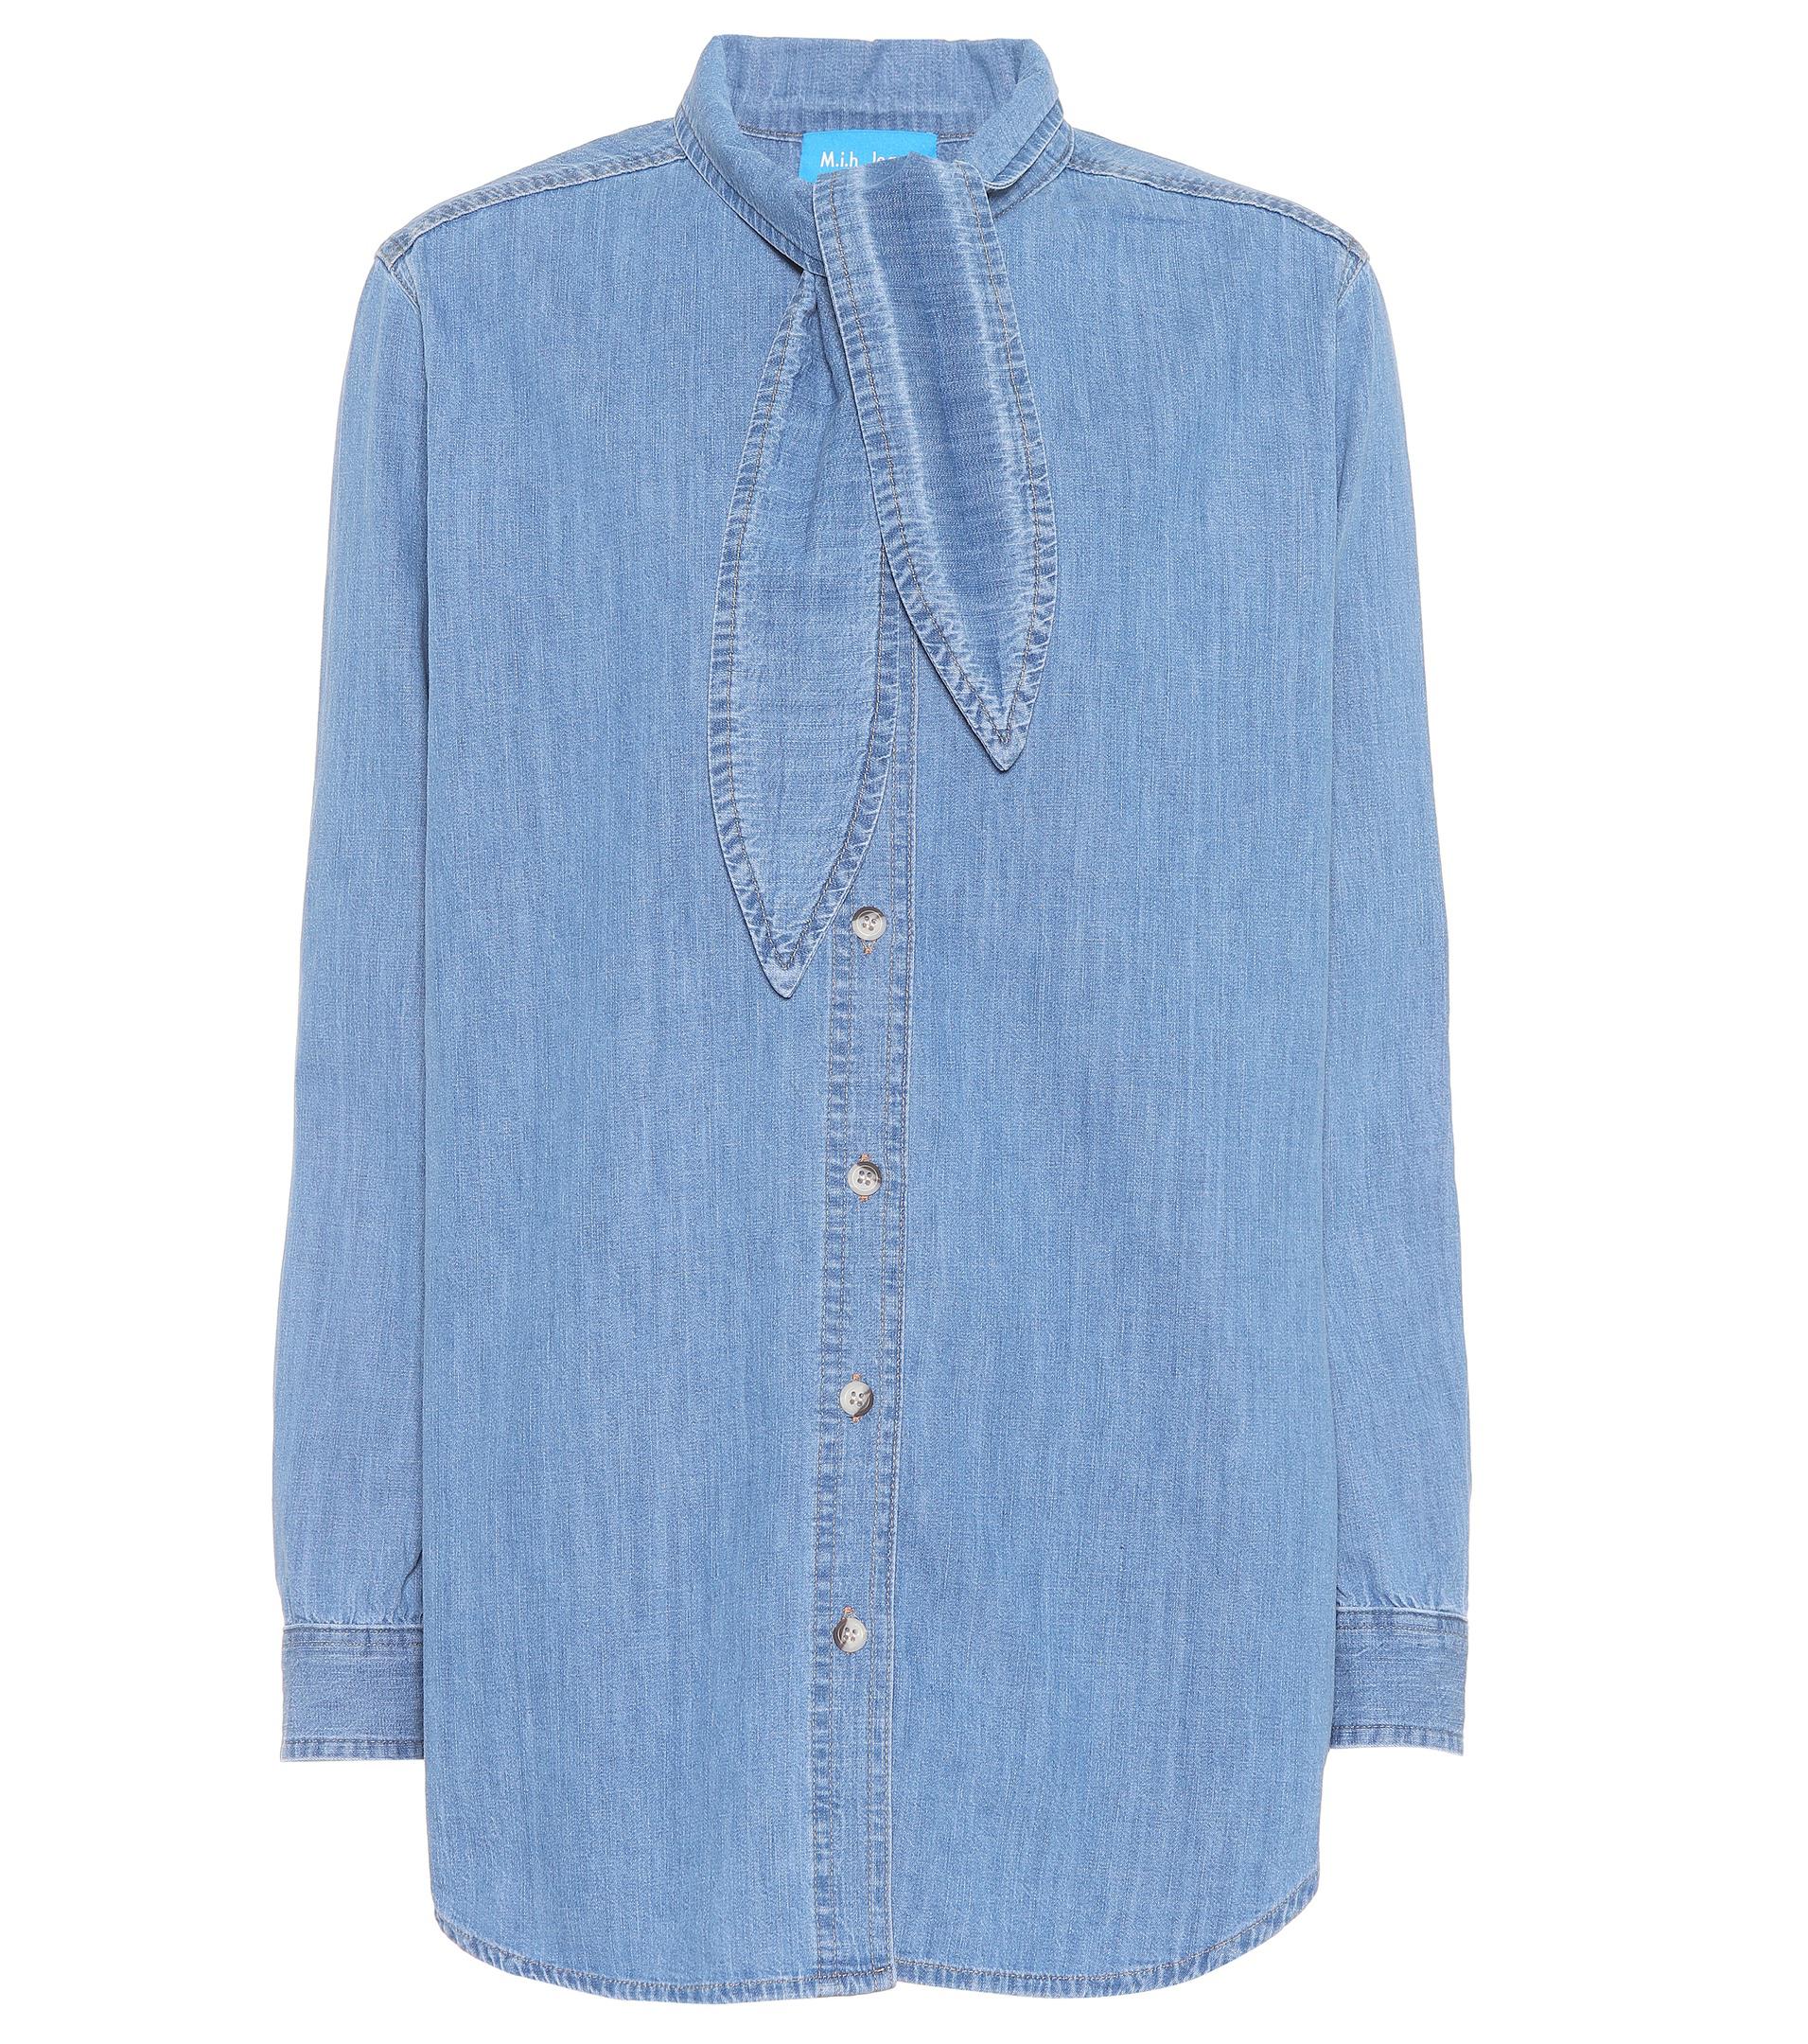 Lyst - Mih Jeans Booker Chambray Shirt in Blue